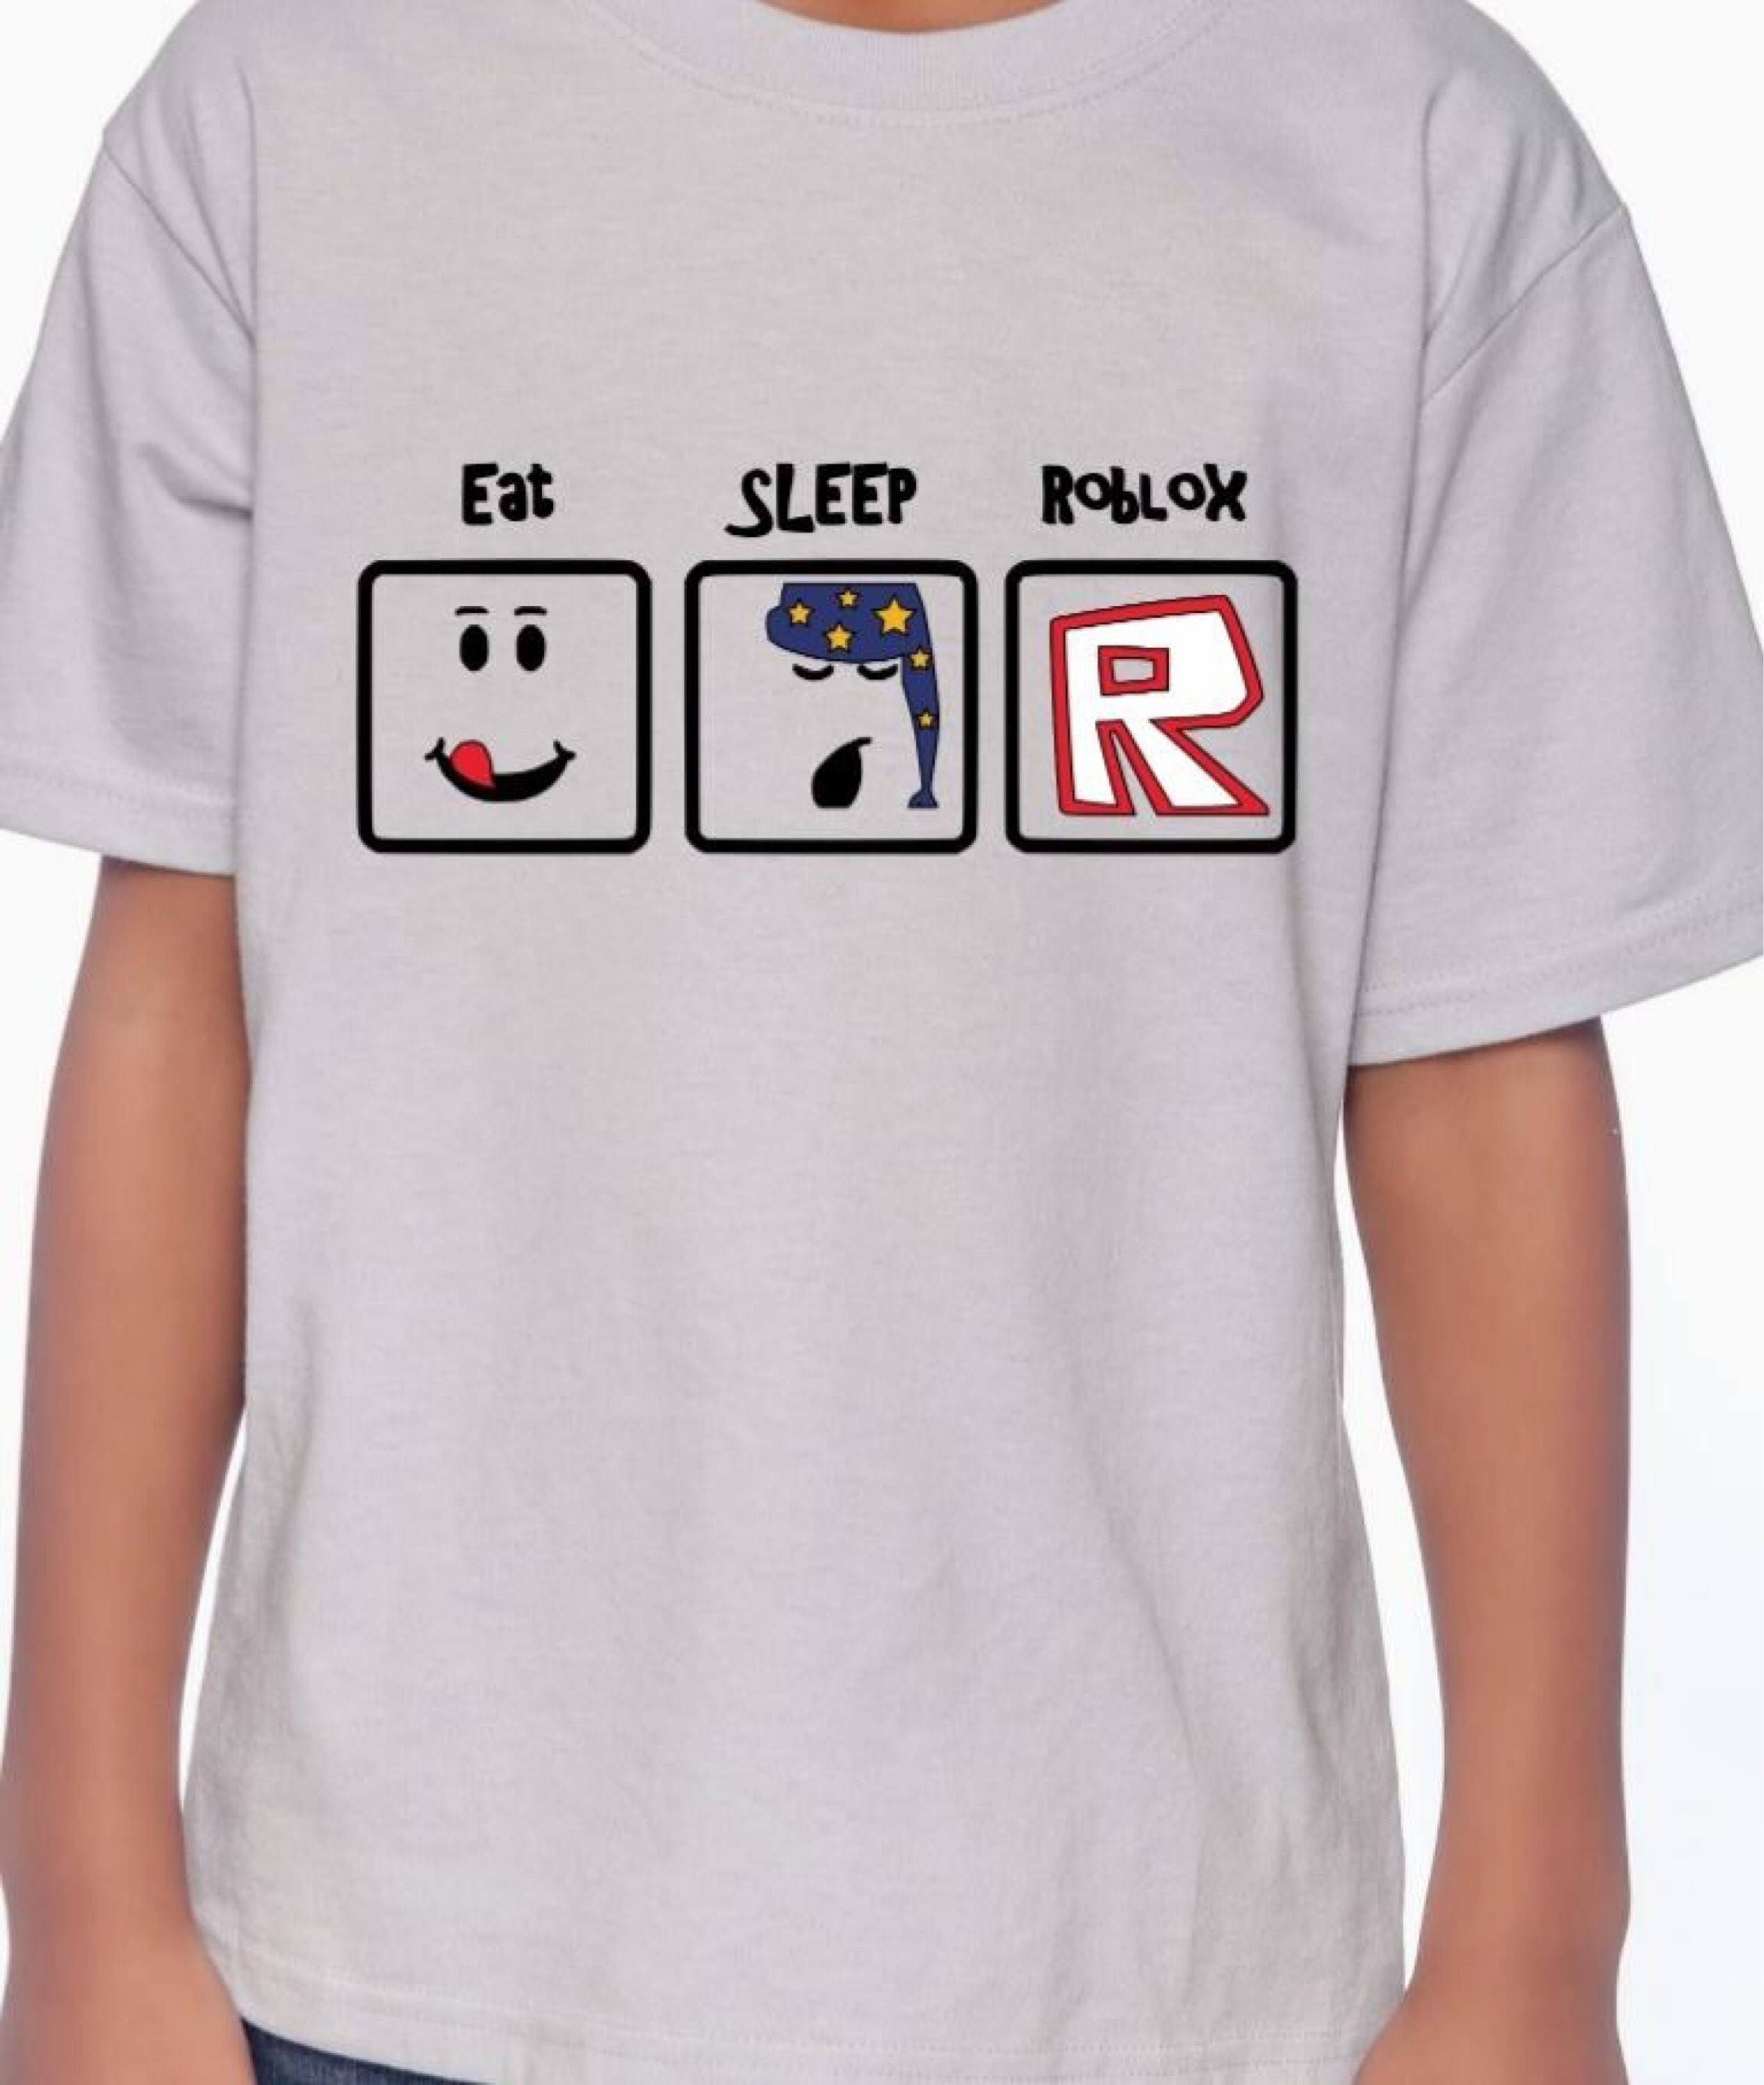 Fox Pants Code For Roblox Tomwhite2010 Com - girls rhs shirt codes codes in desc roblox youtube